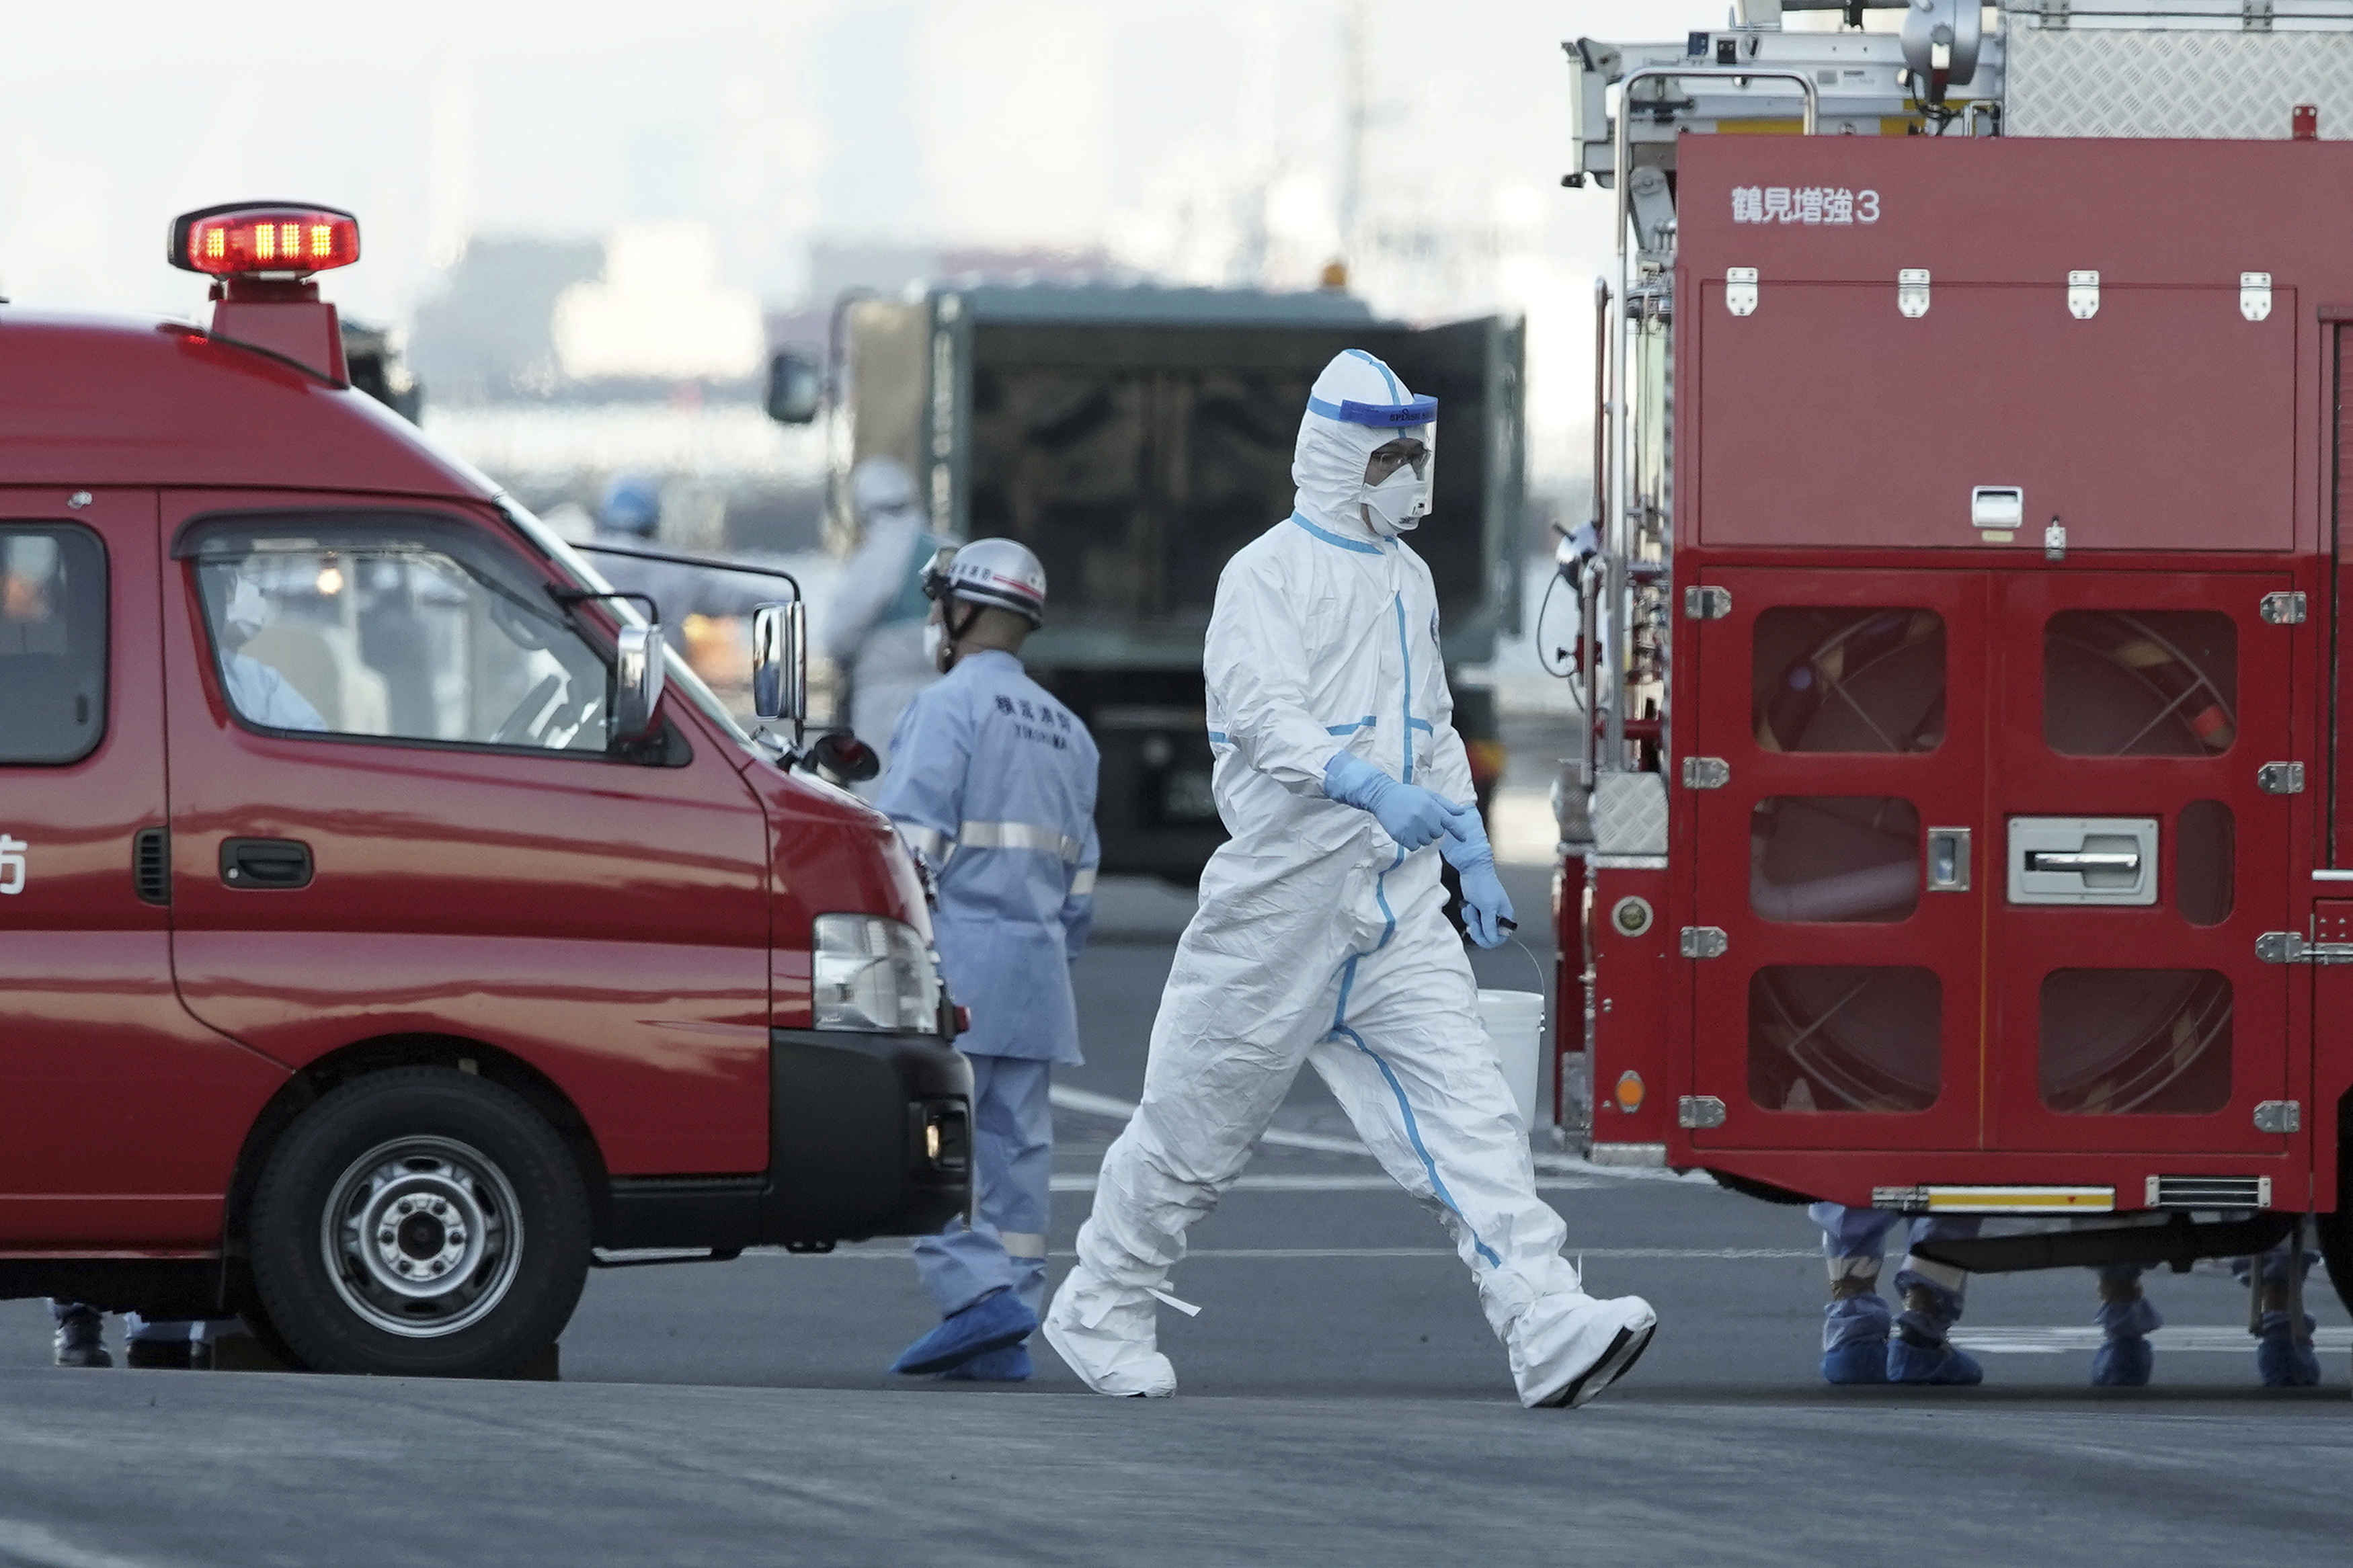 An official in a protective suit walks near the Diamond Princess docked in Yokohama, Tokyo, on Feb. 10, 2020. (AP—Copyright 2020 The Associated Press. All rights reserved.)